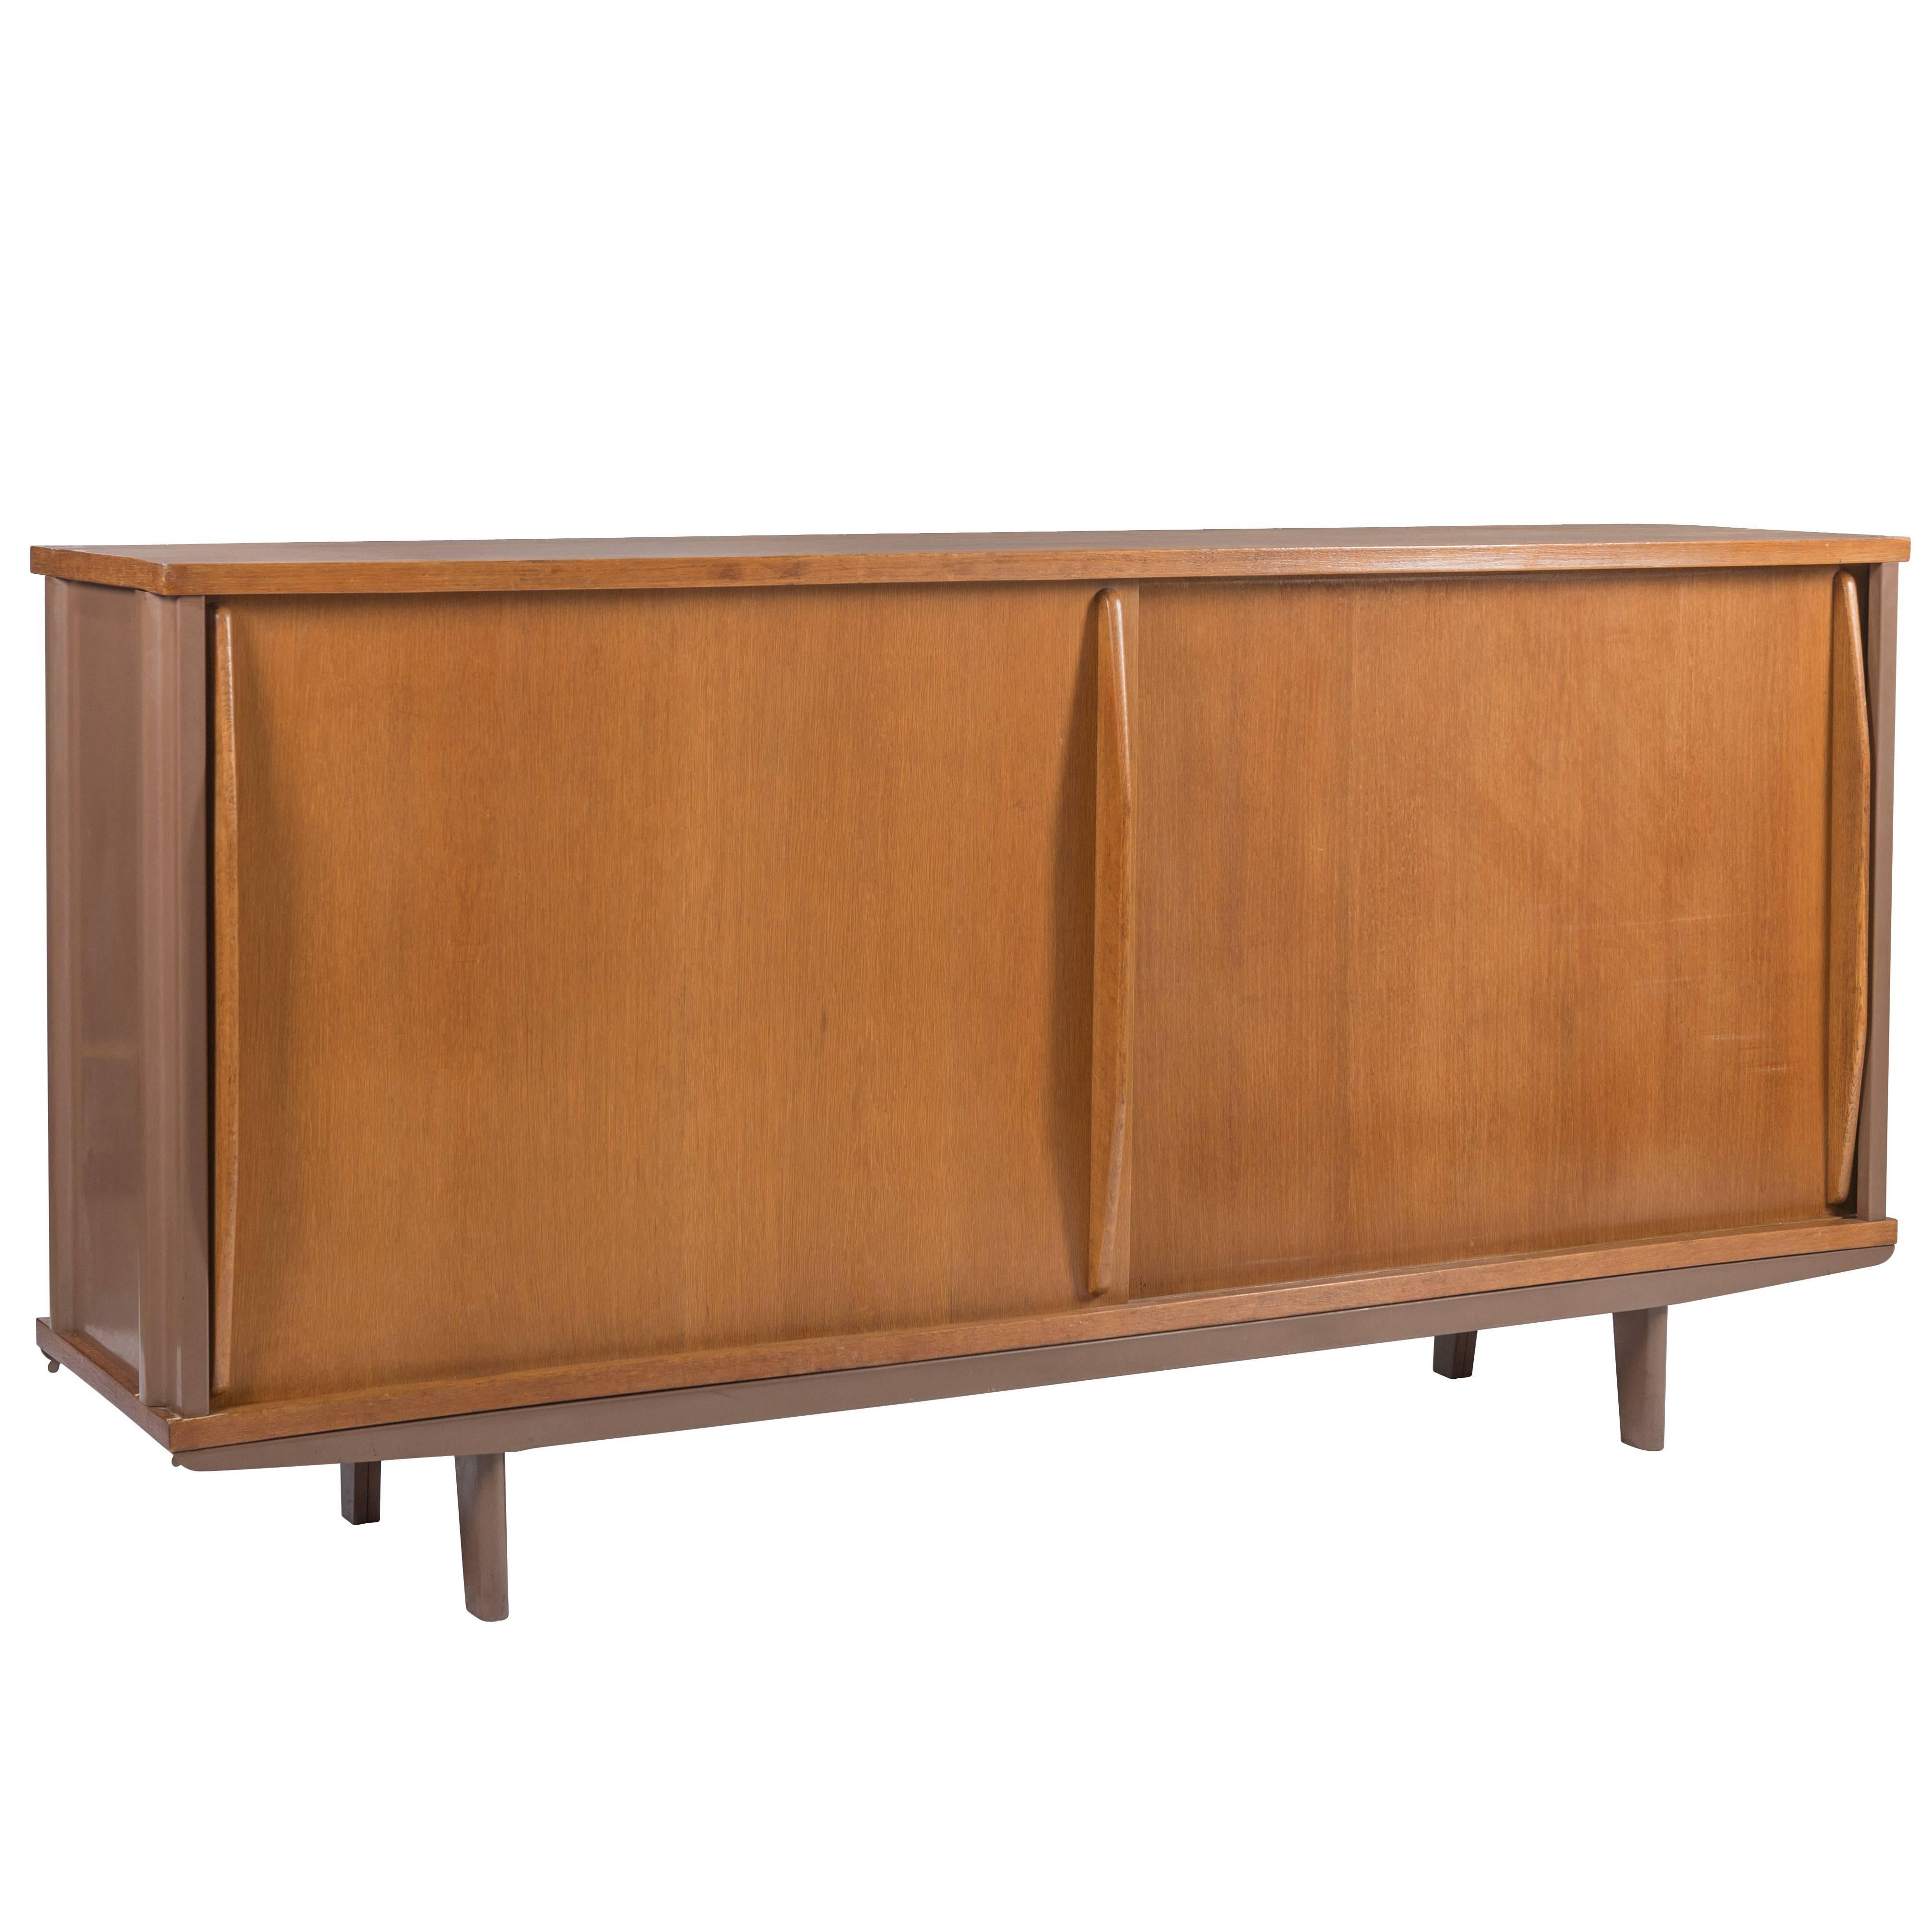 Rare and Important Jean Prouvé Cabinet